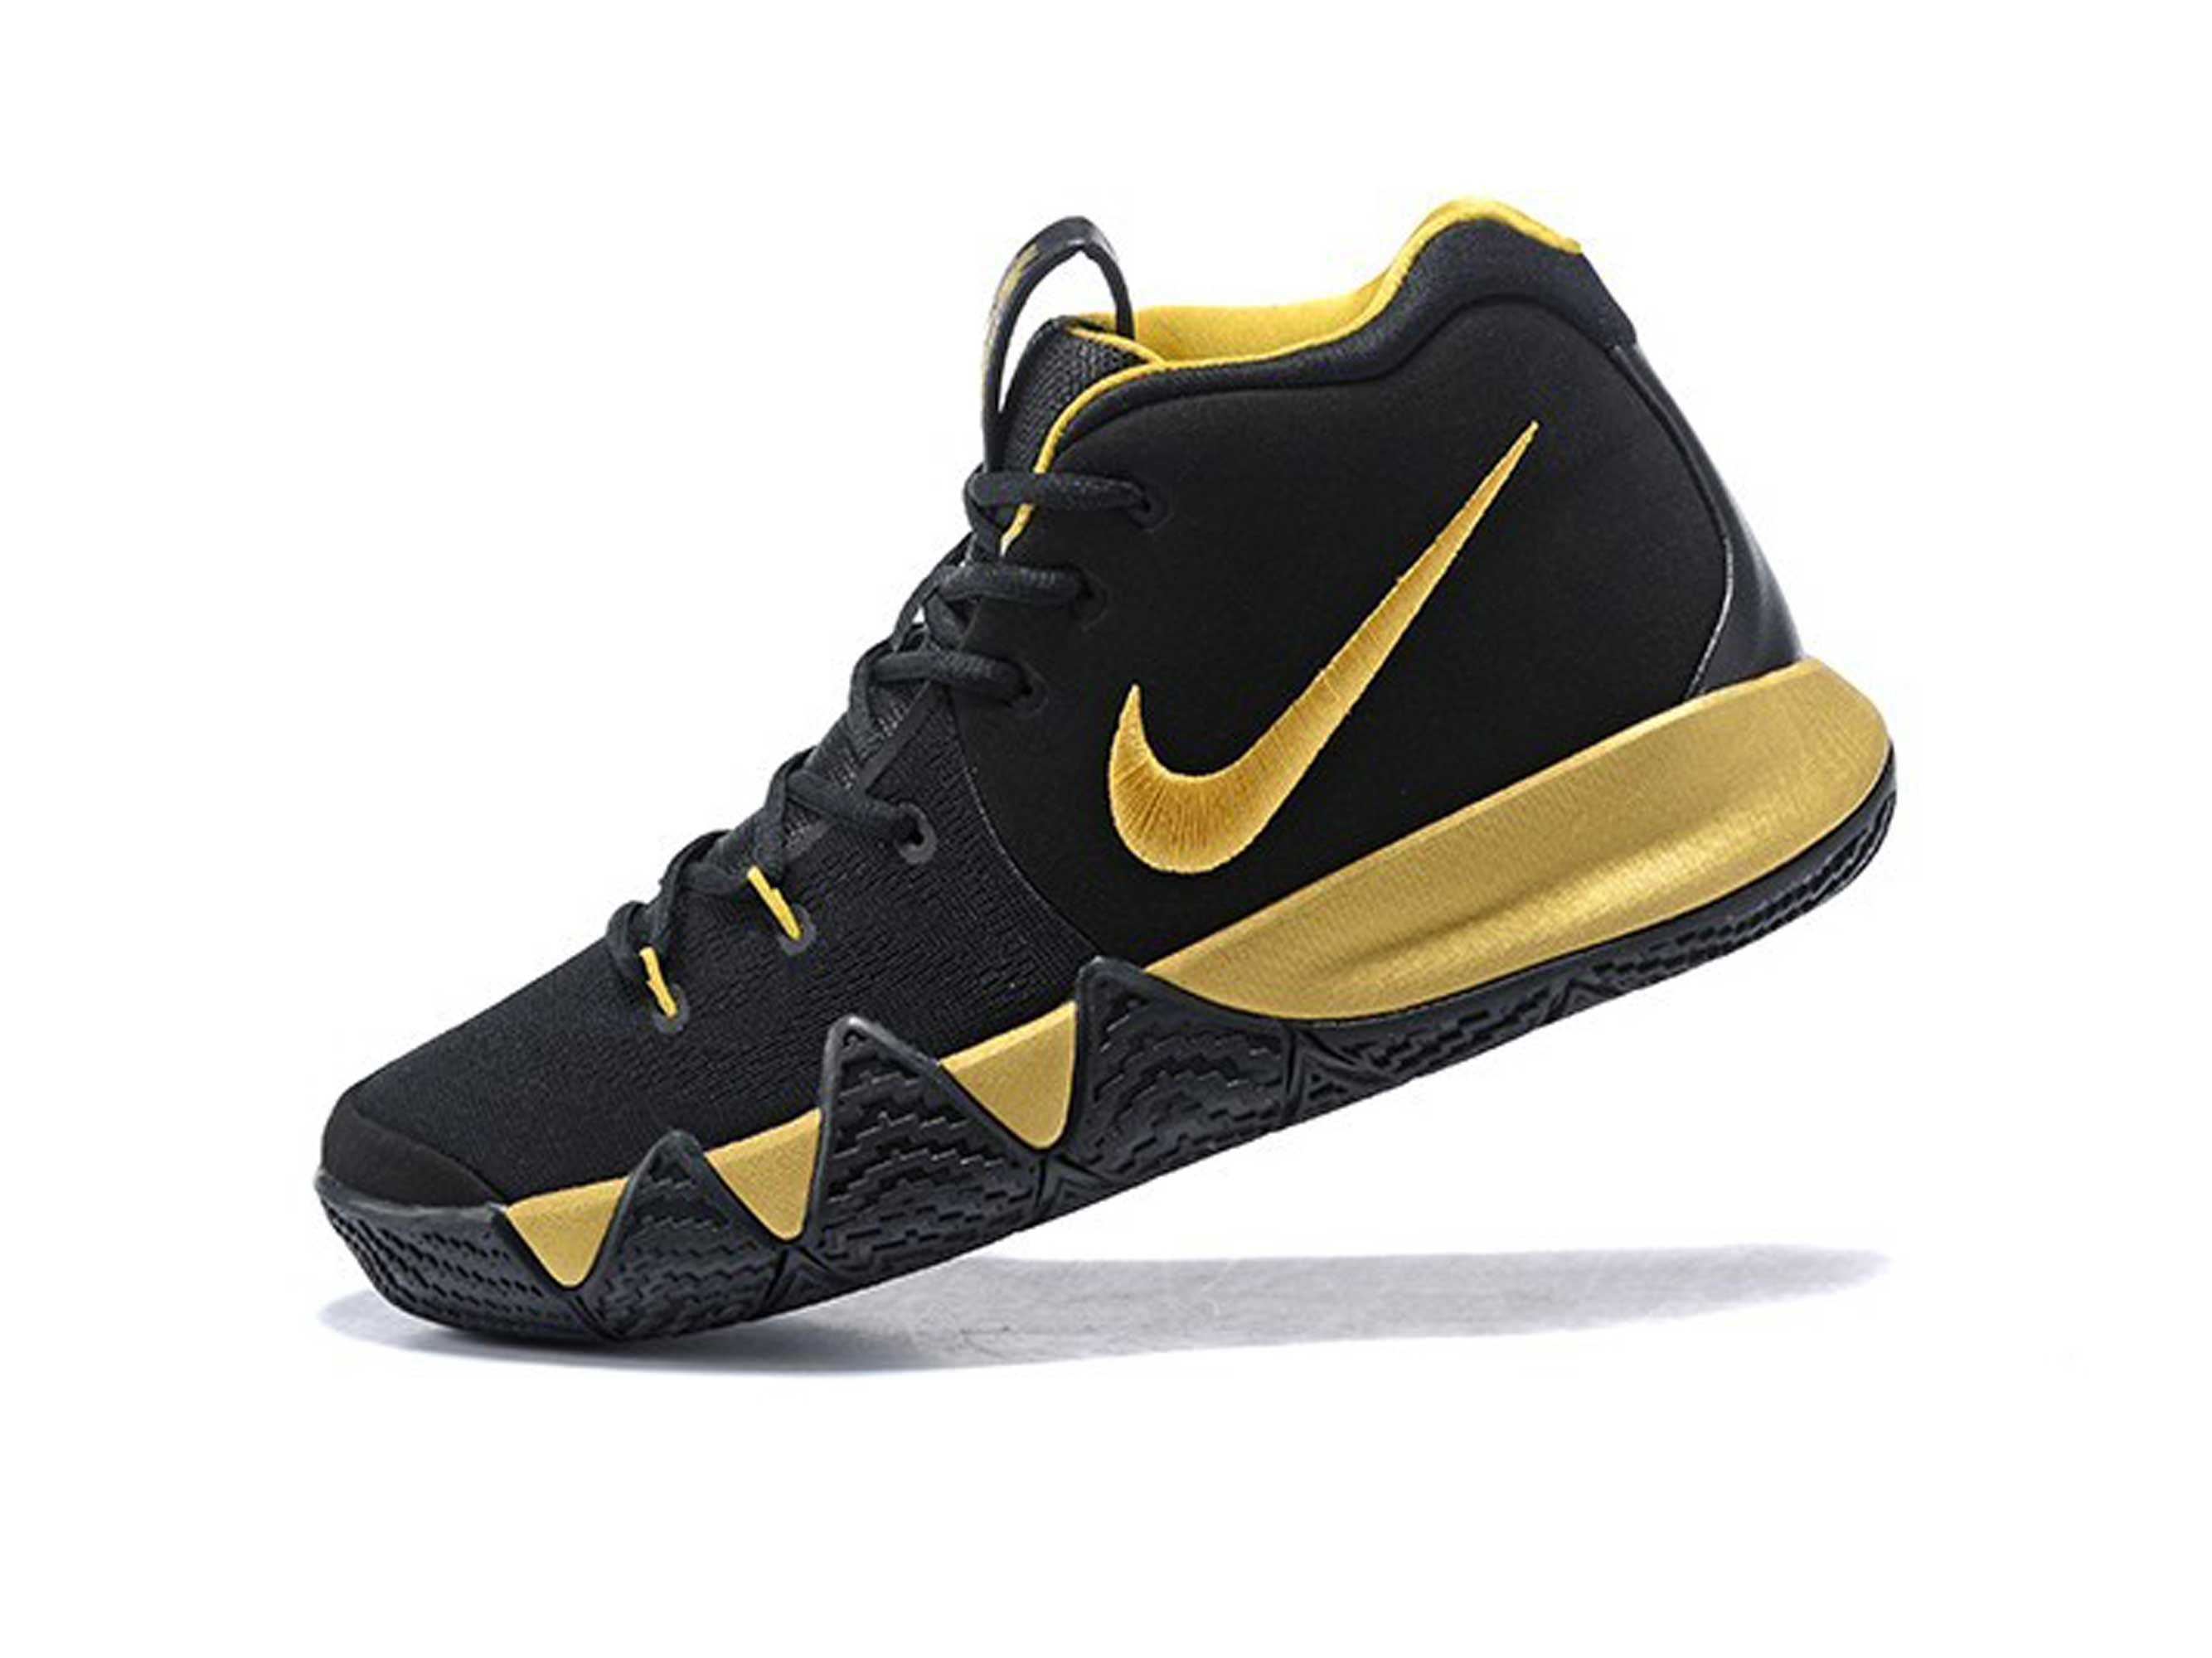 kyrie 4 gold and black